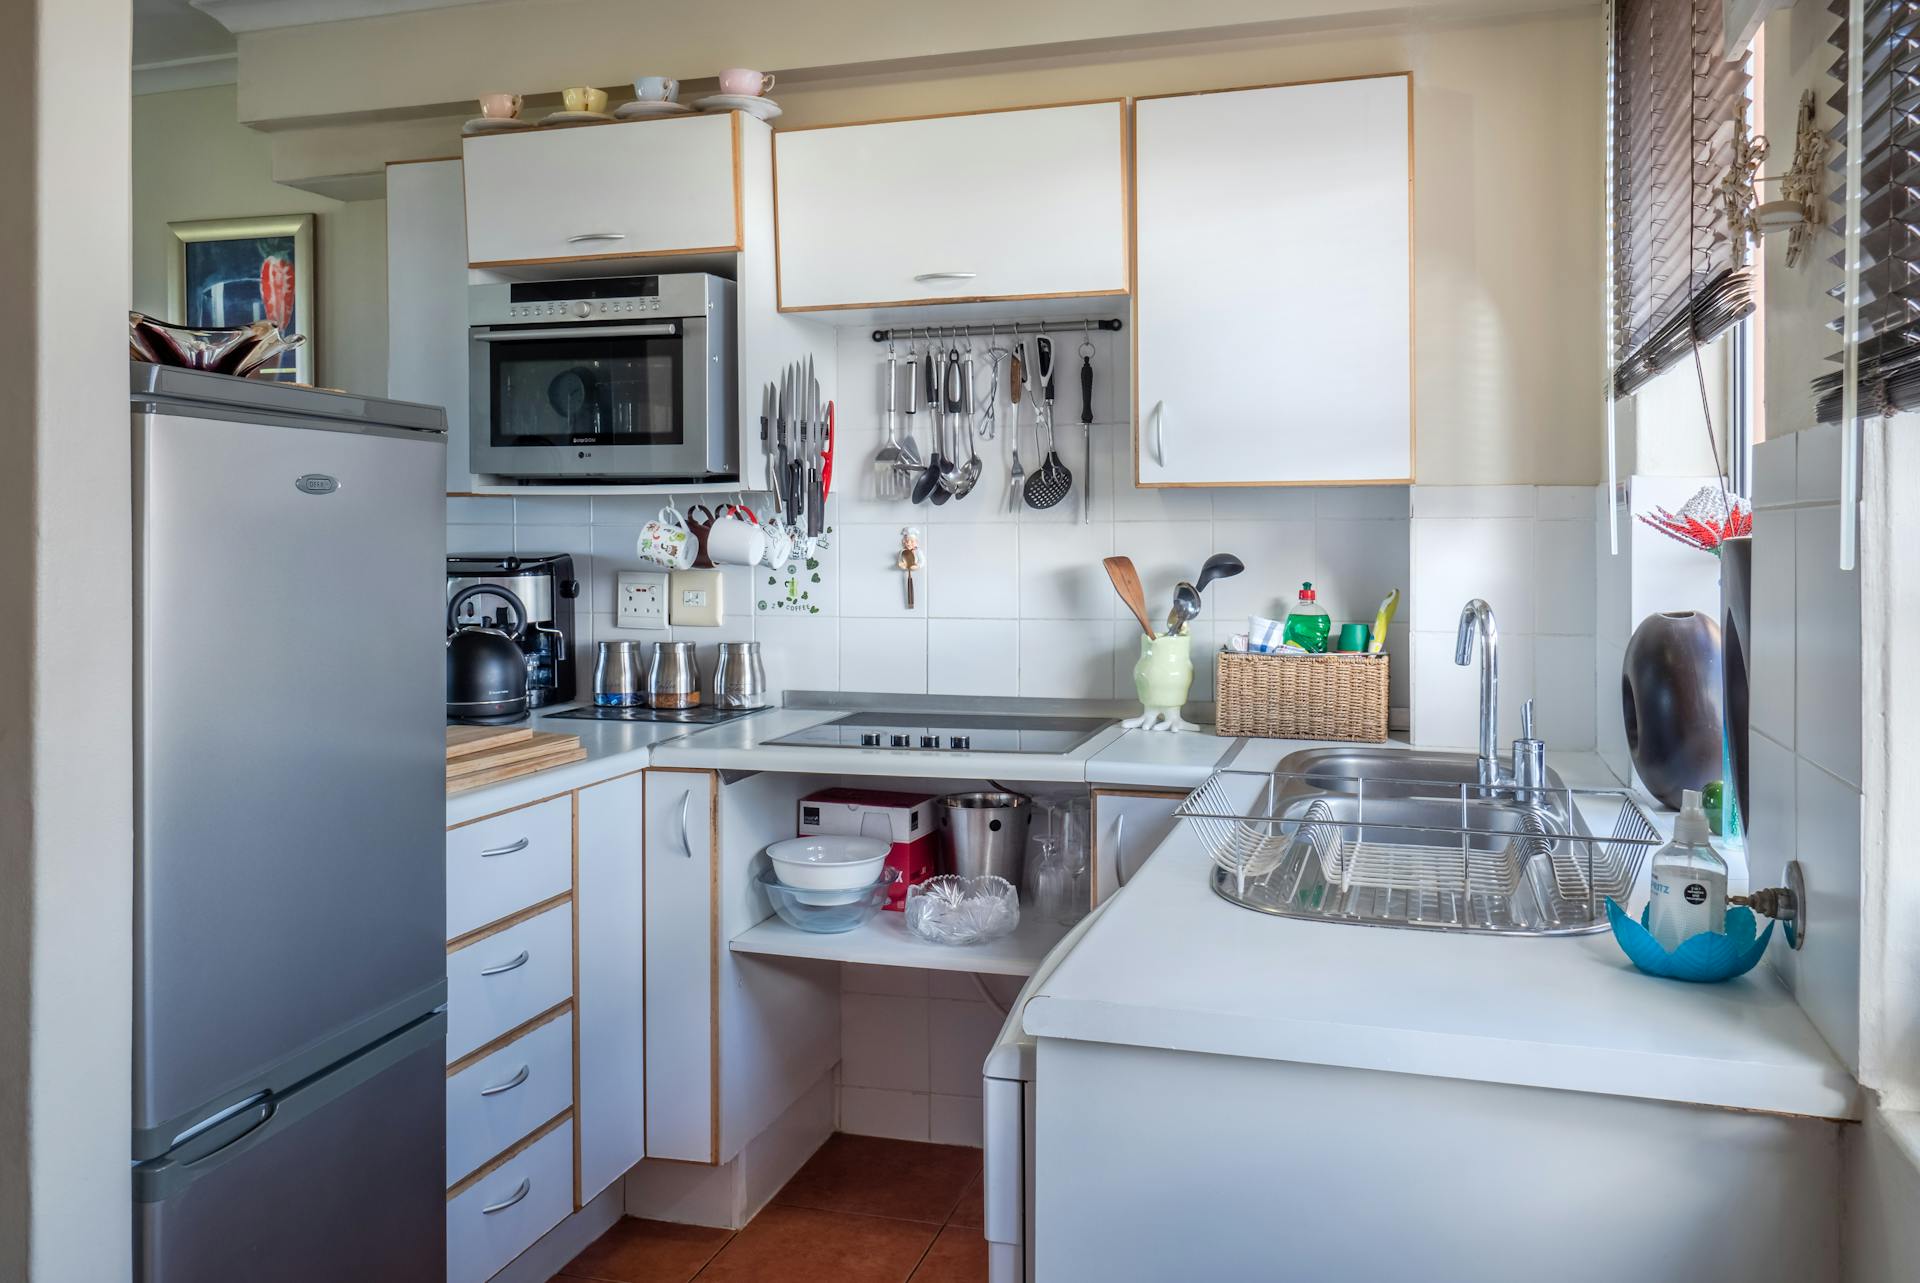 appliance cleaning services nyc